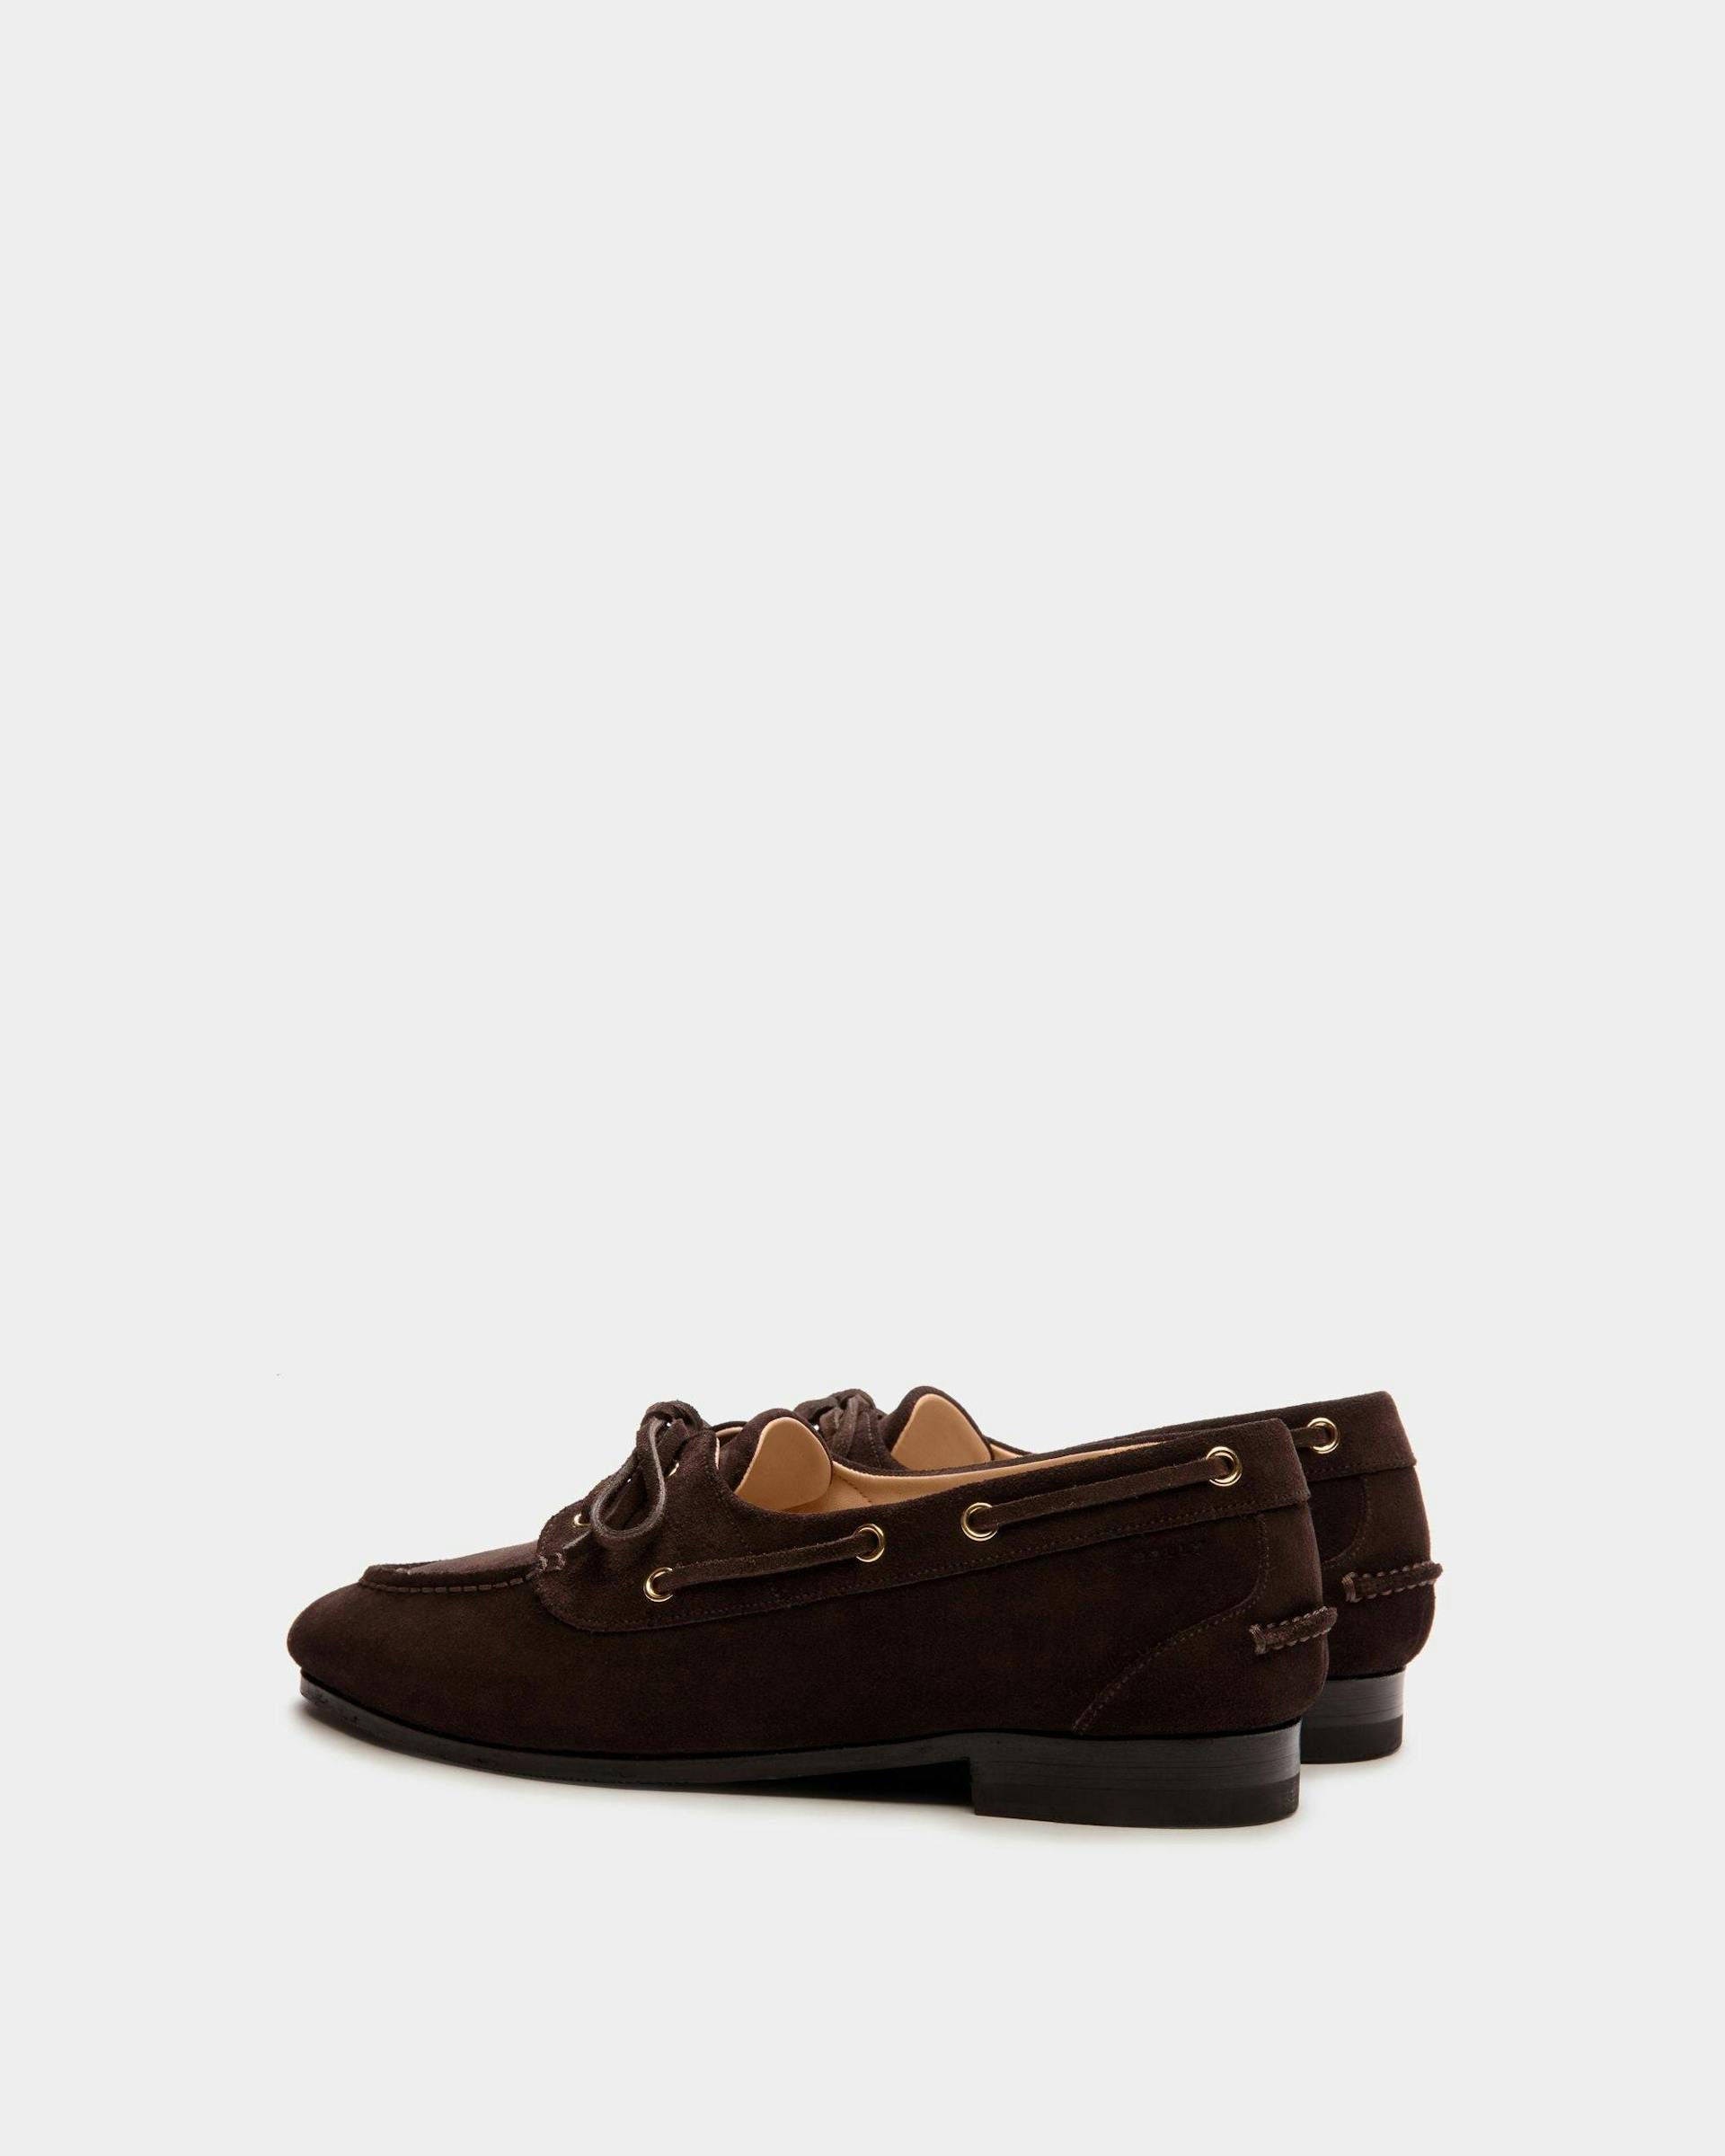 Women's Plume Moccasin in Dark Brown Suede | Bally | Still Life 3/4 Back